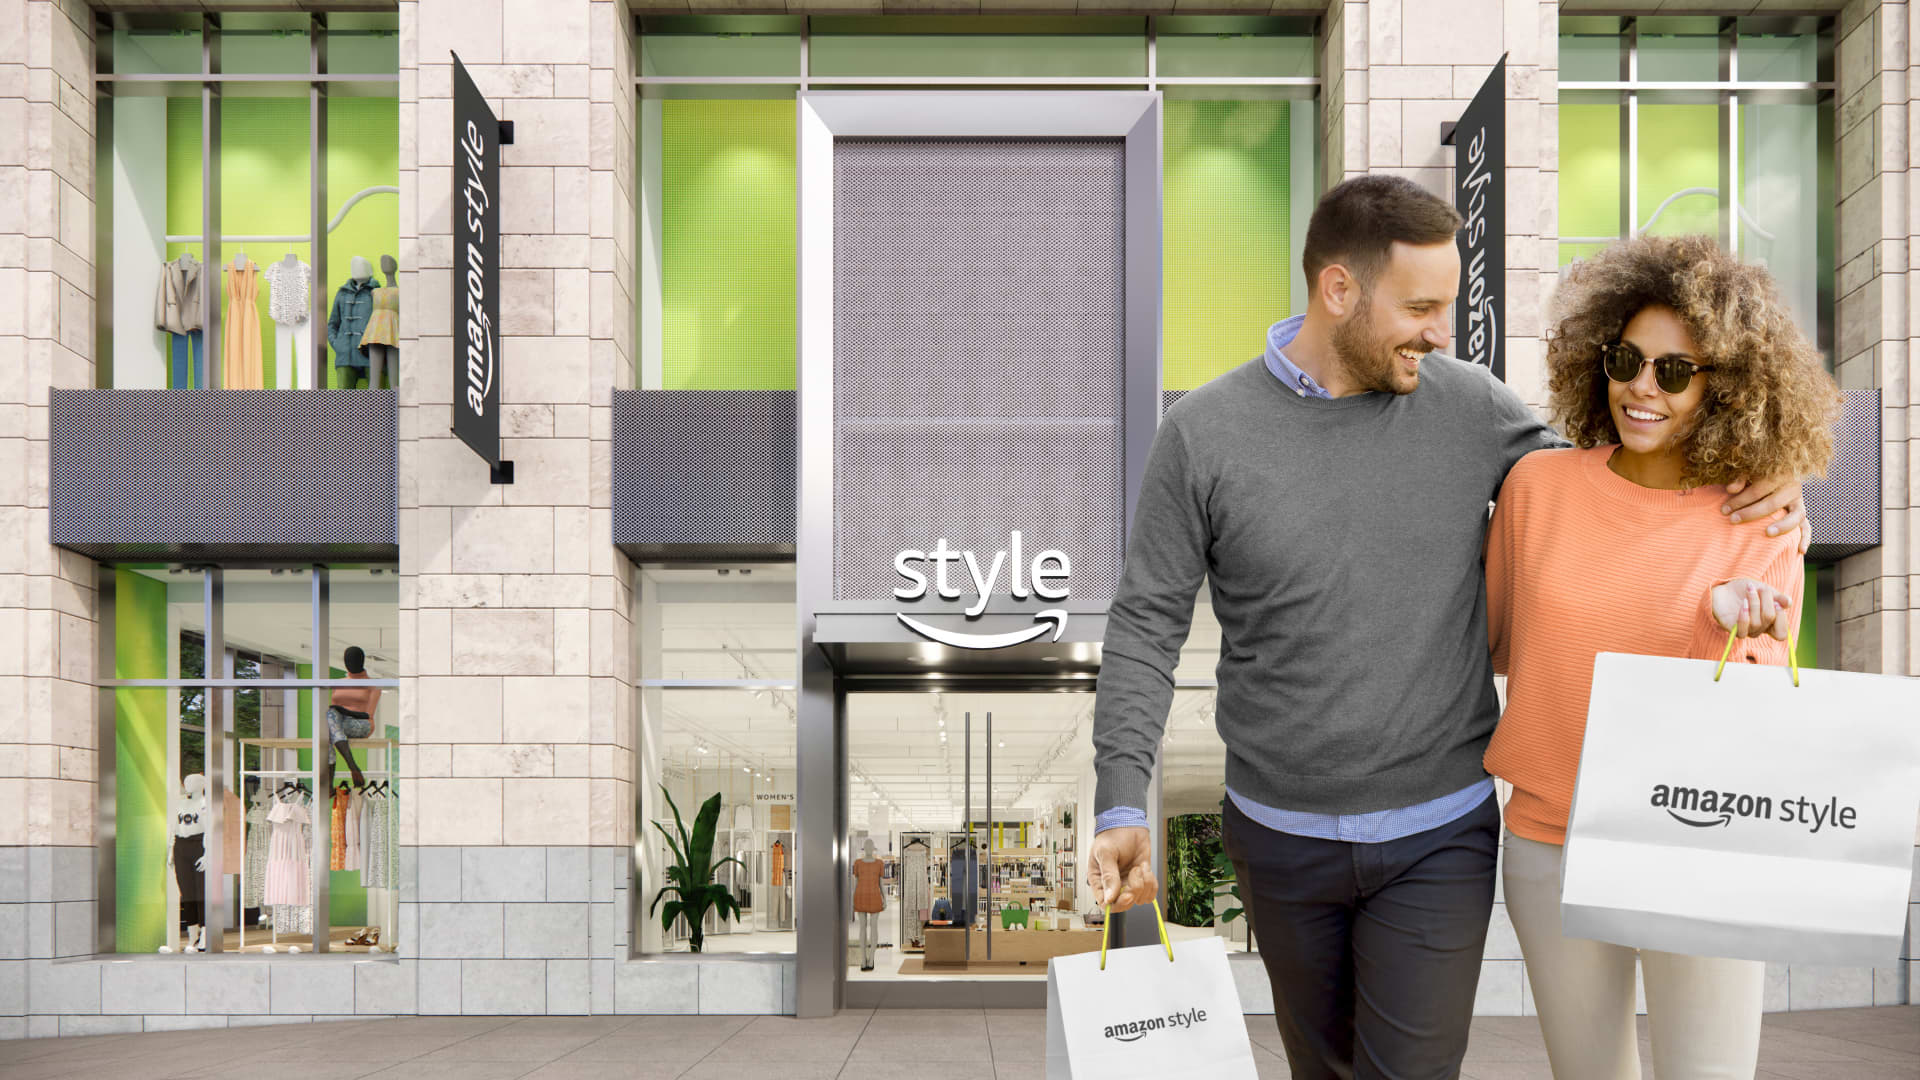 Amazon Style's first storefront is set to open in The Americana at Brand mall in Los Angeles sometime in 2022.